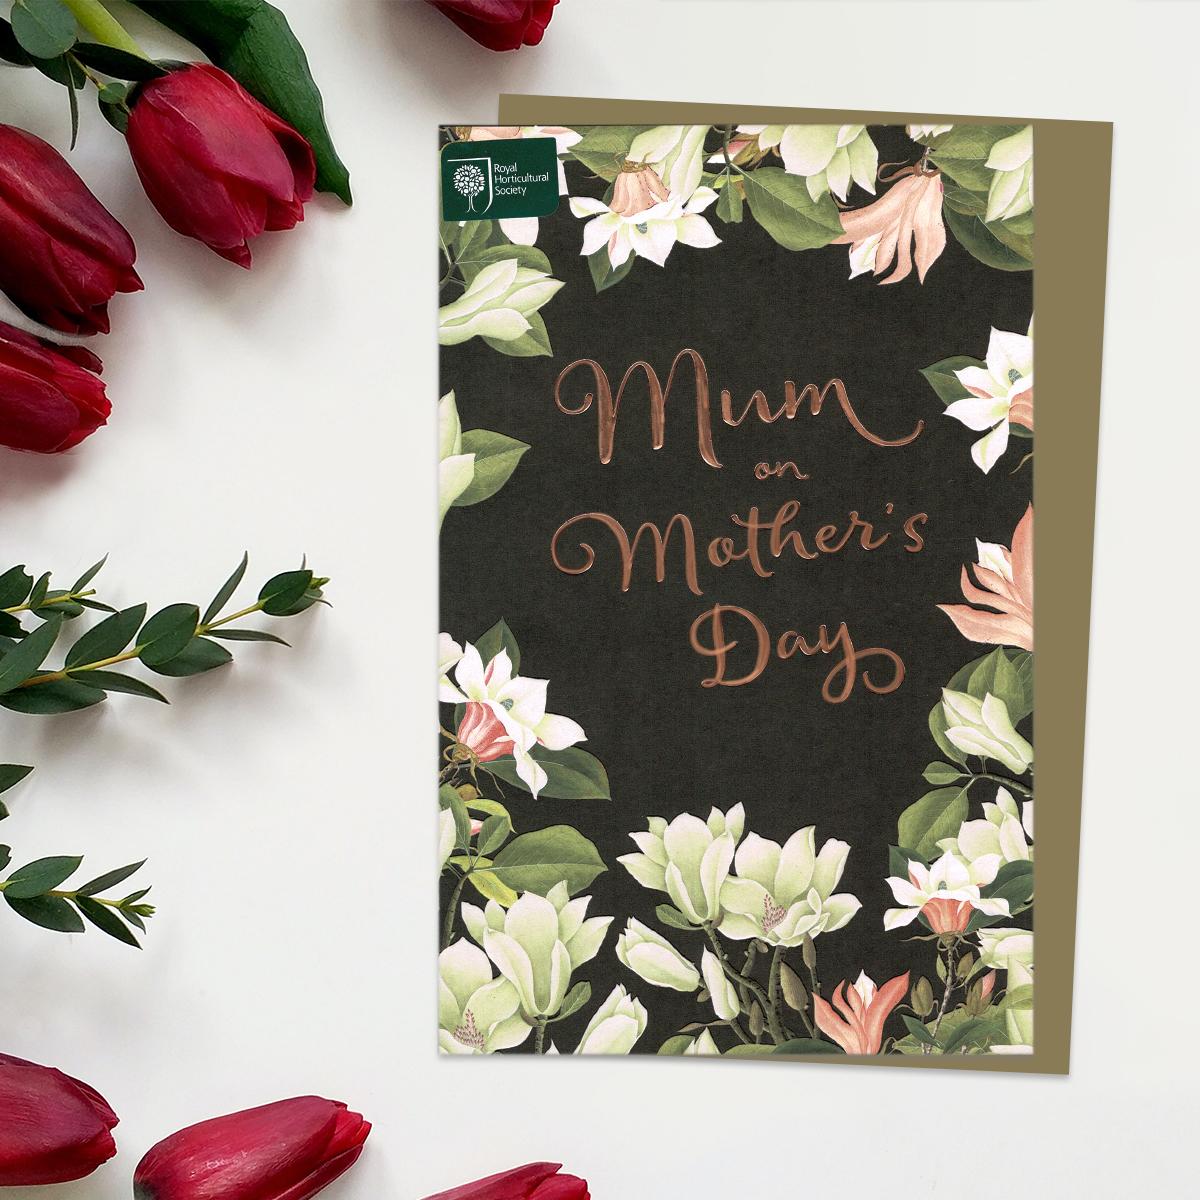 ' RHS Mum On Mother's Day' Card Featuring A Black Background With Beautiful Flowers Creating A Border. With Brown Envelope